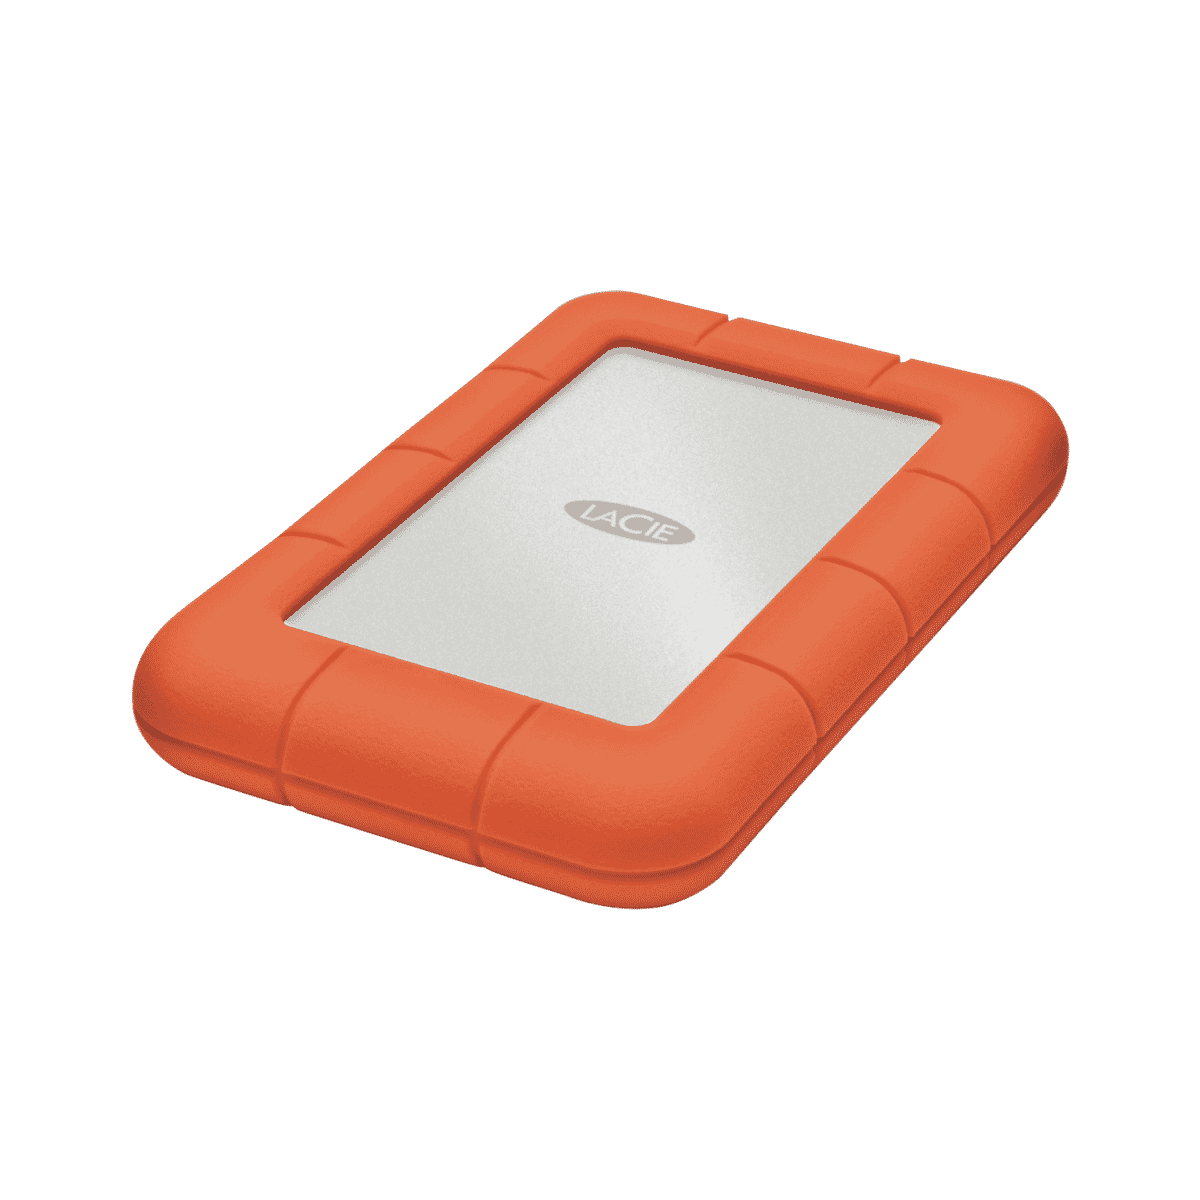 Lacie 3021182 2tb Rugged Mini Portable Hdd At The Good Guys